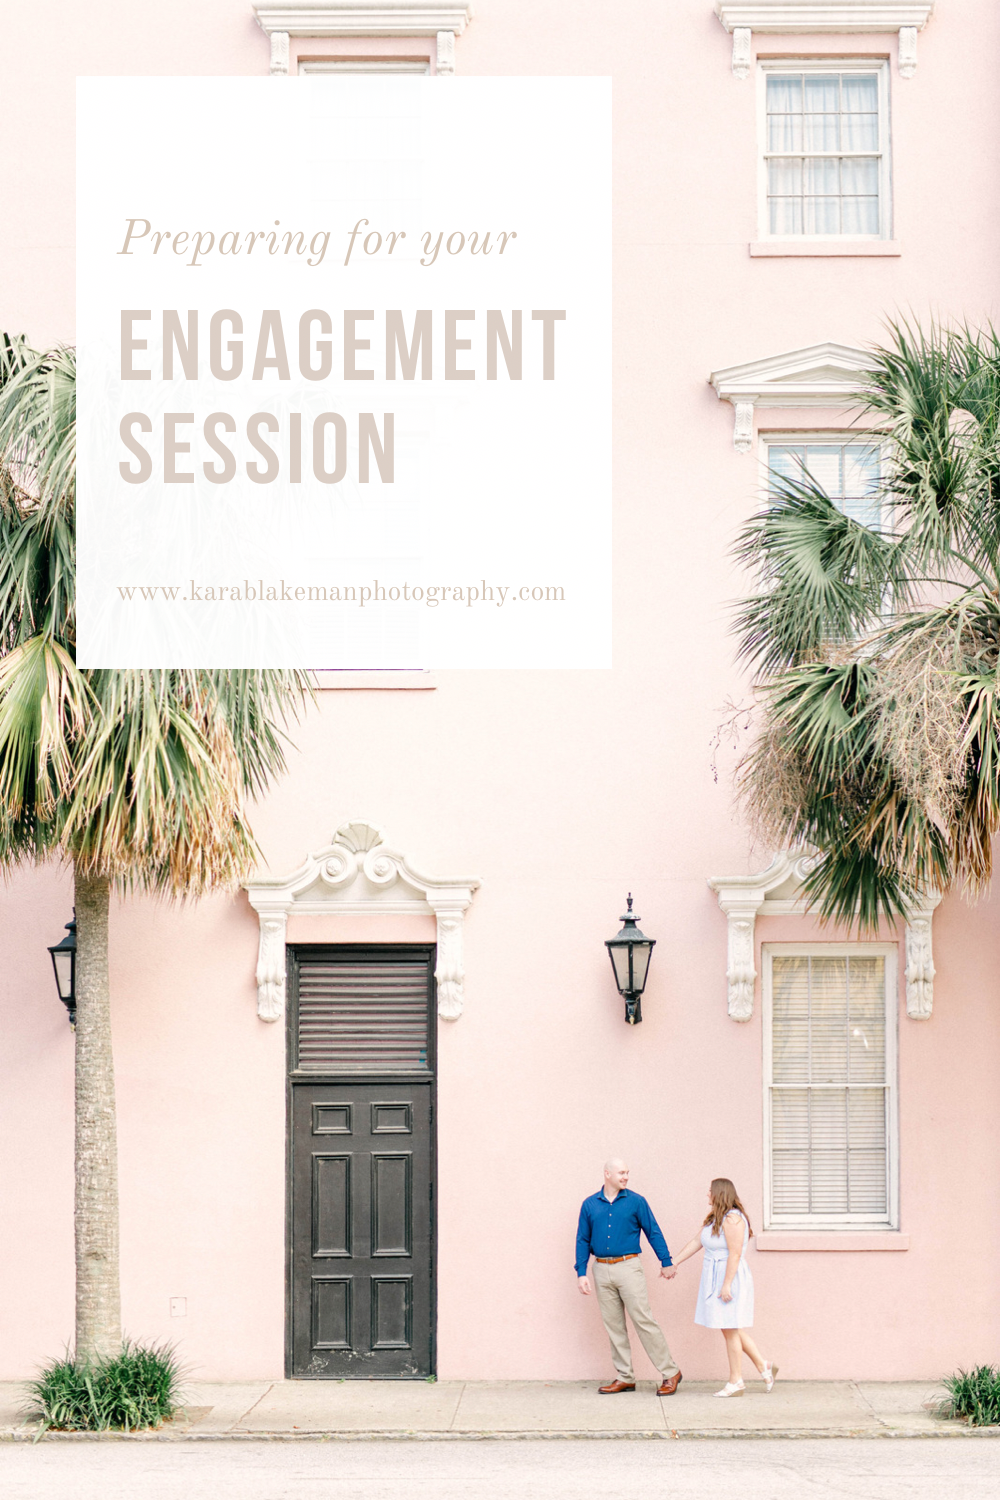 Engagement Session Tips and Tricks